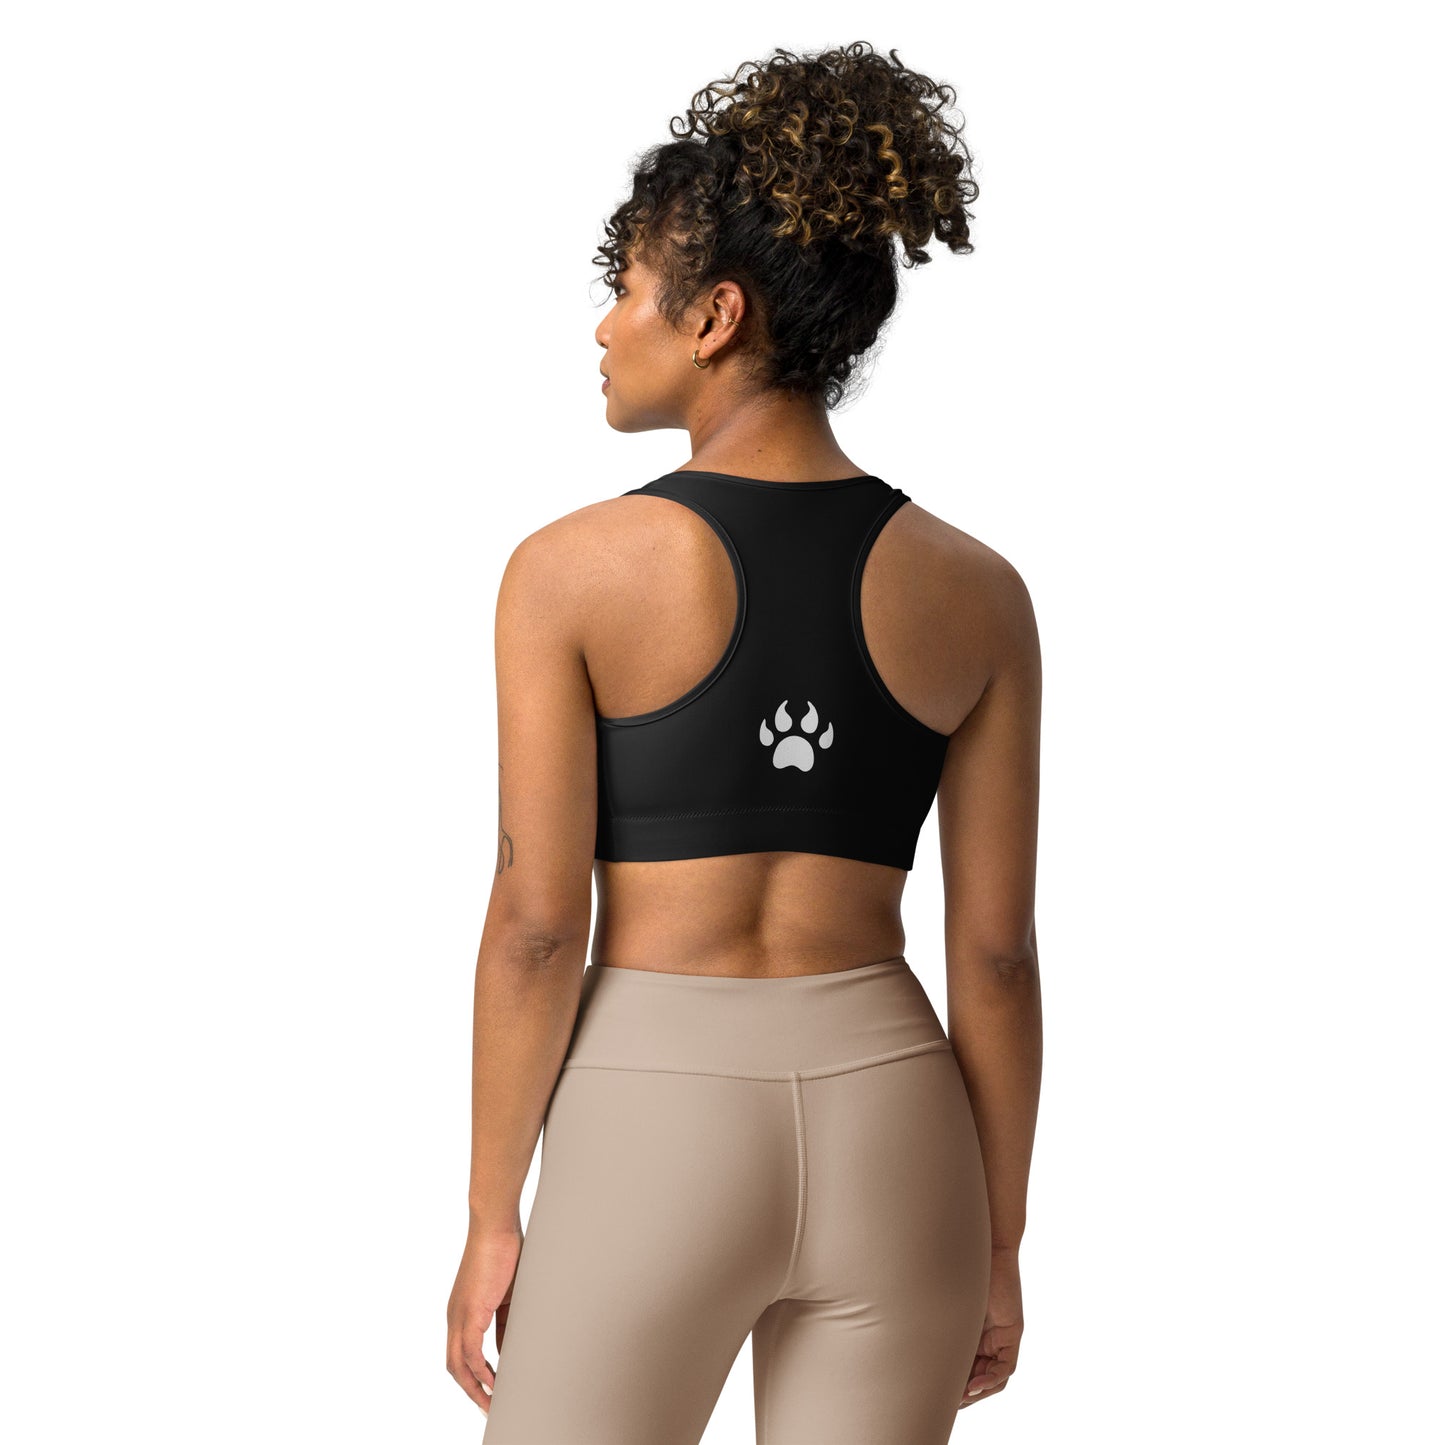 The back view of a woman wearing a Sweetest Paw Sports Bra Black.